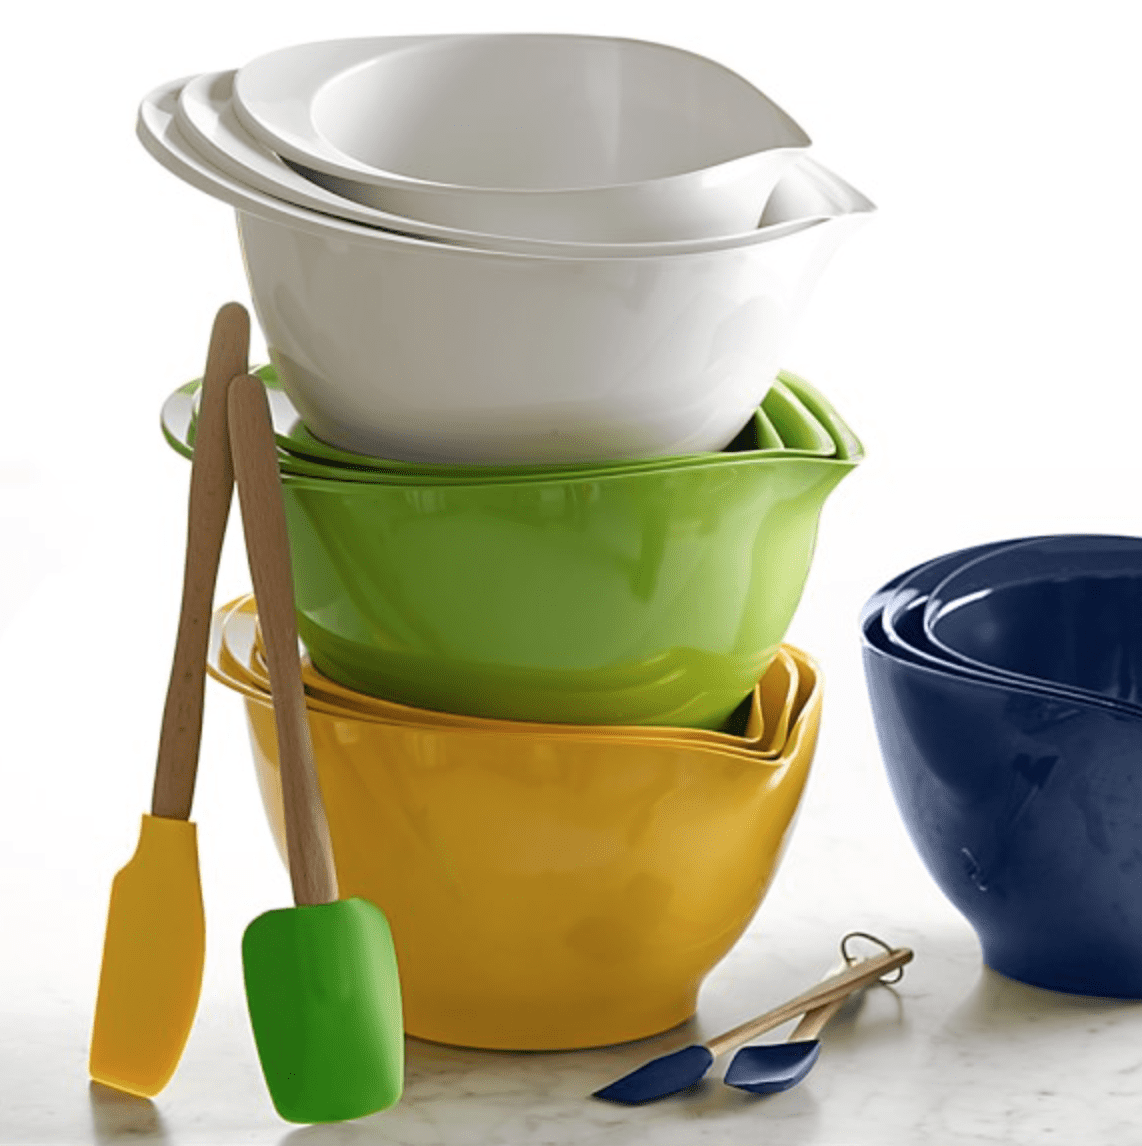 15 Classic Mixing Bowls with Pouring Spouts